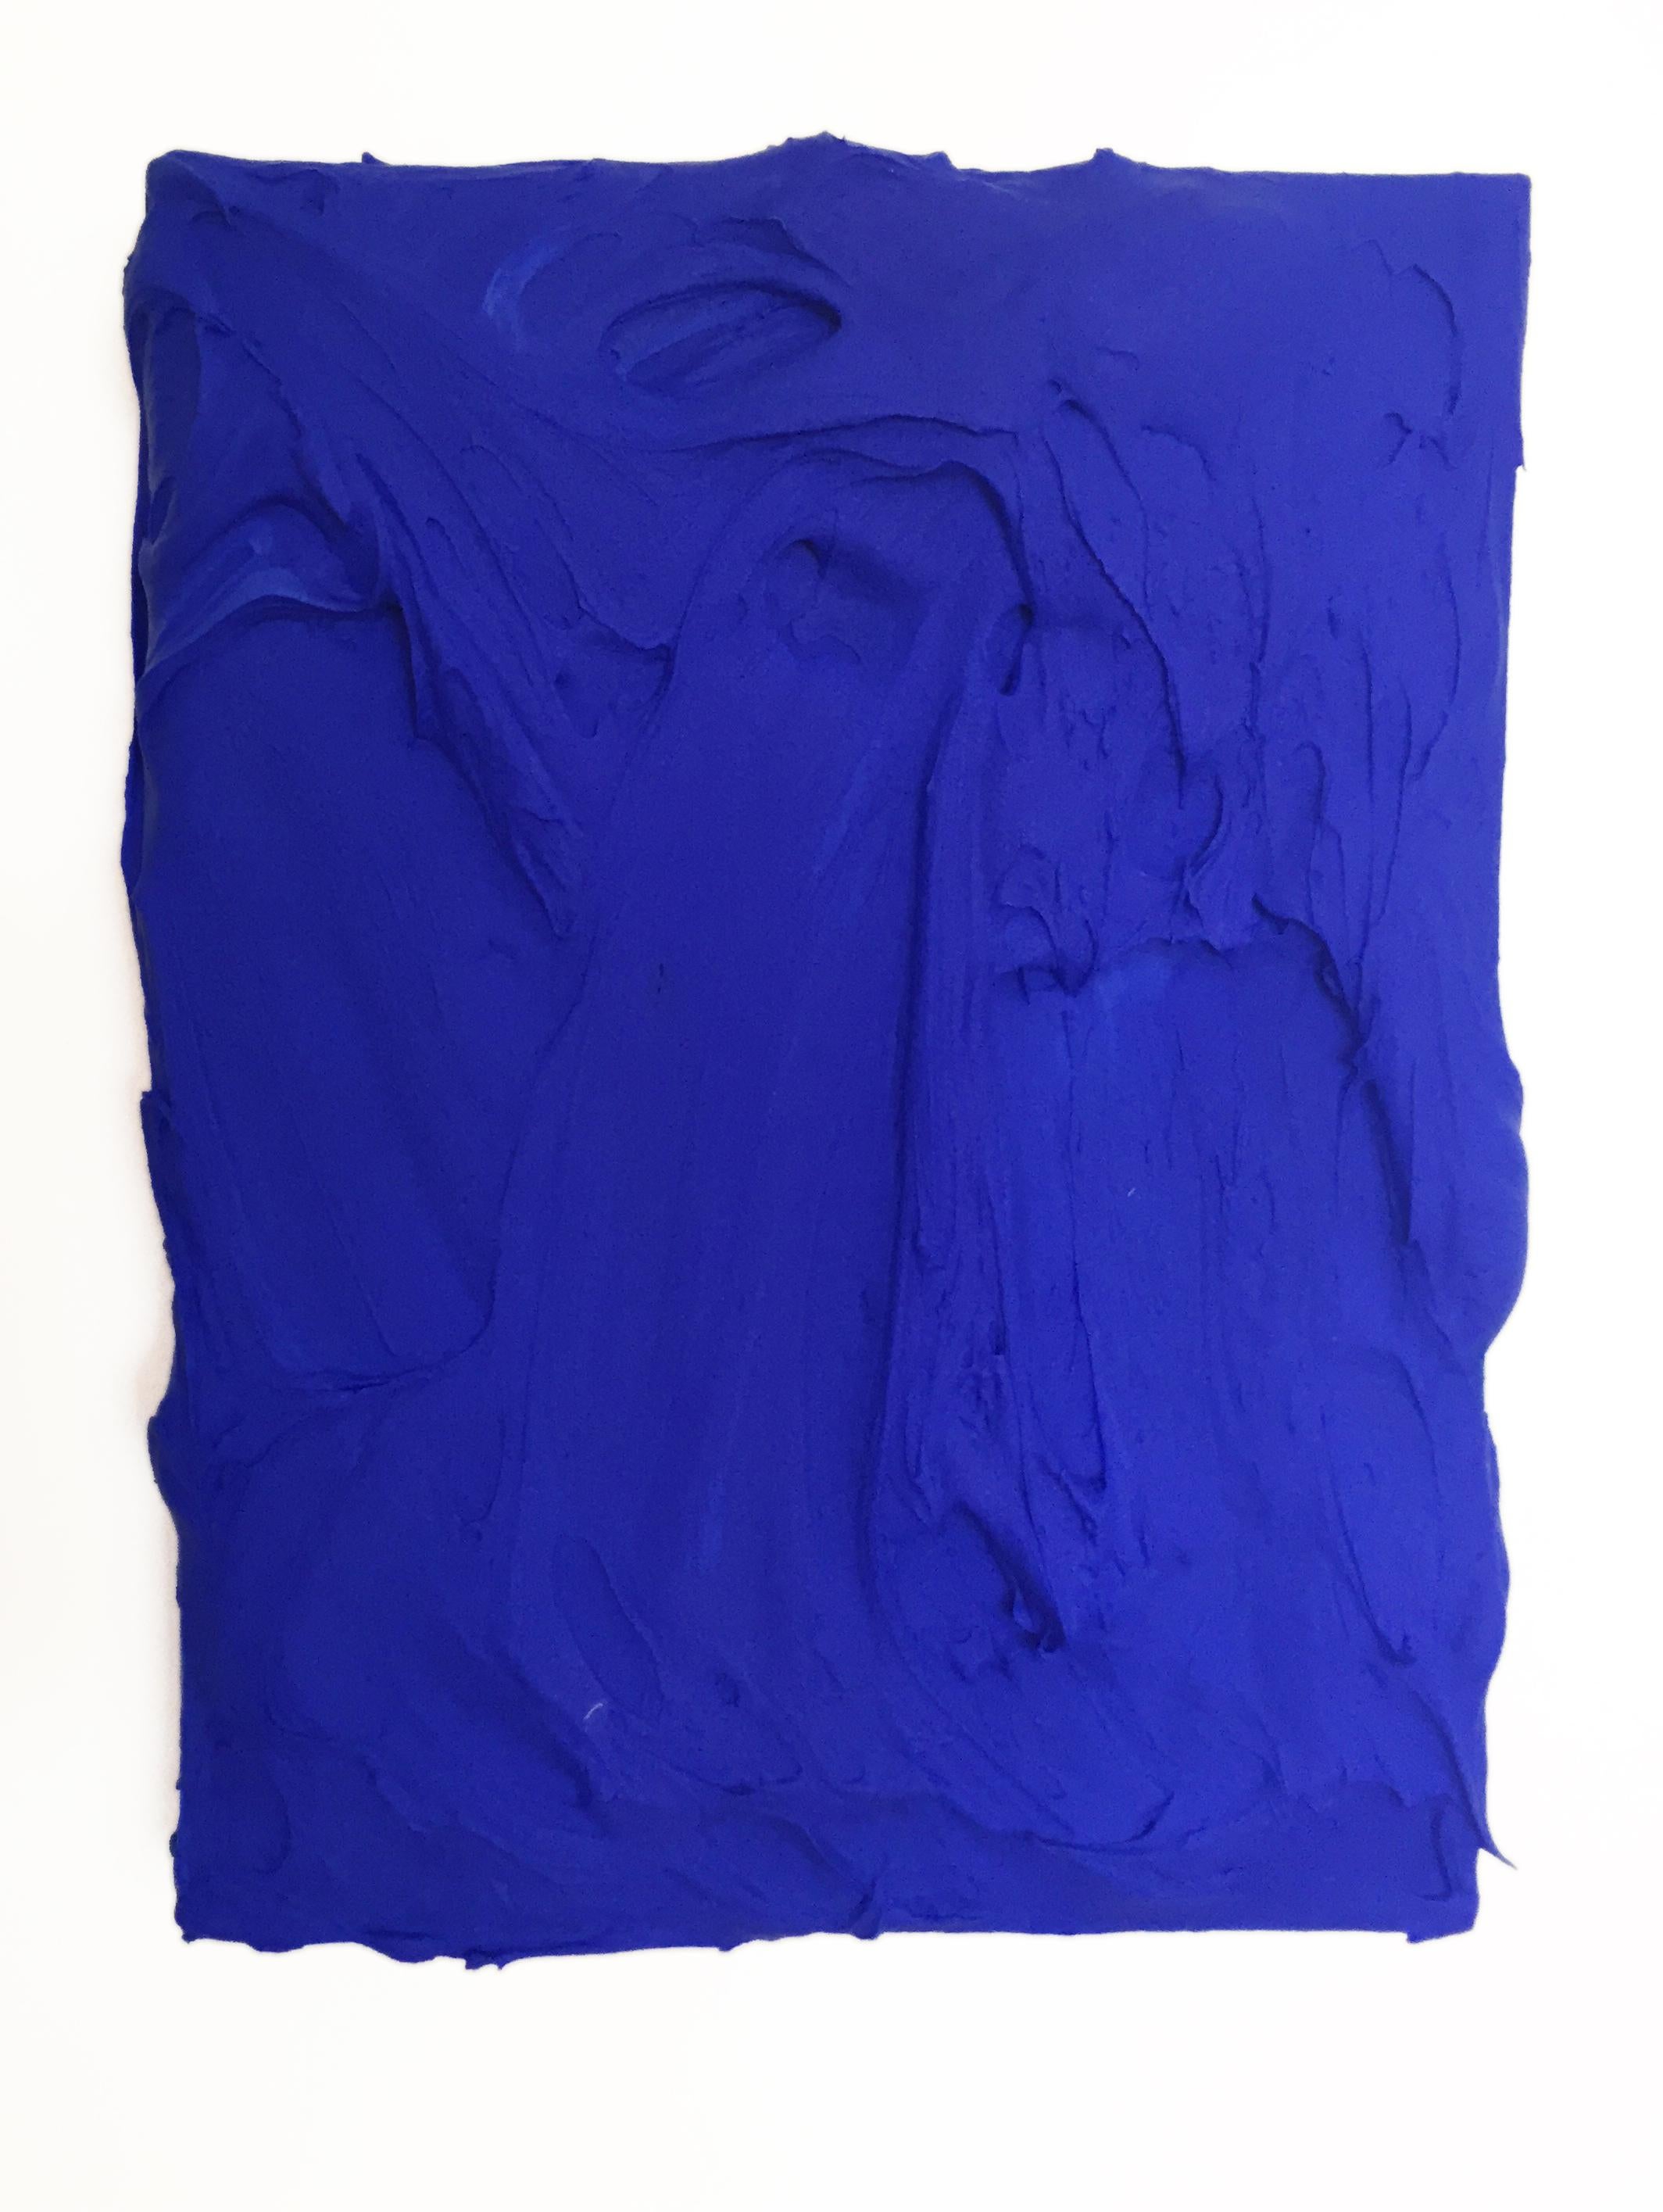 Chloe Hedden Abstract Painting - Ultra Blue Excess (impasto texture thick painting monochrome pop bold design)